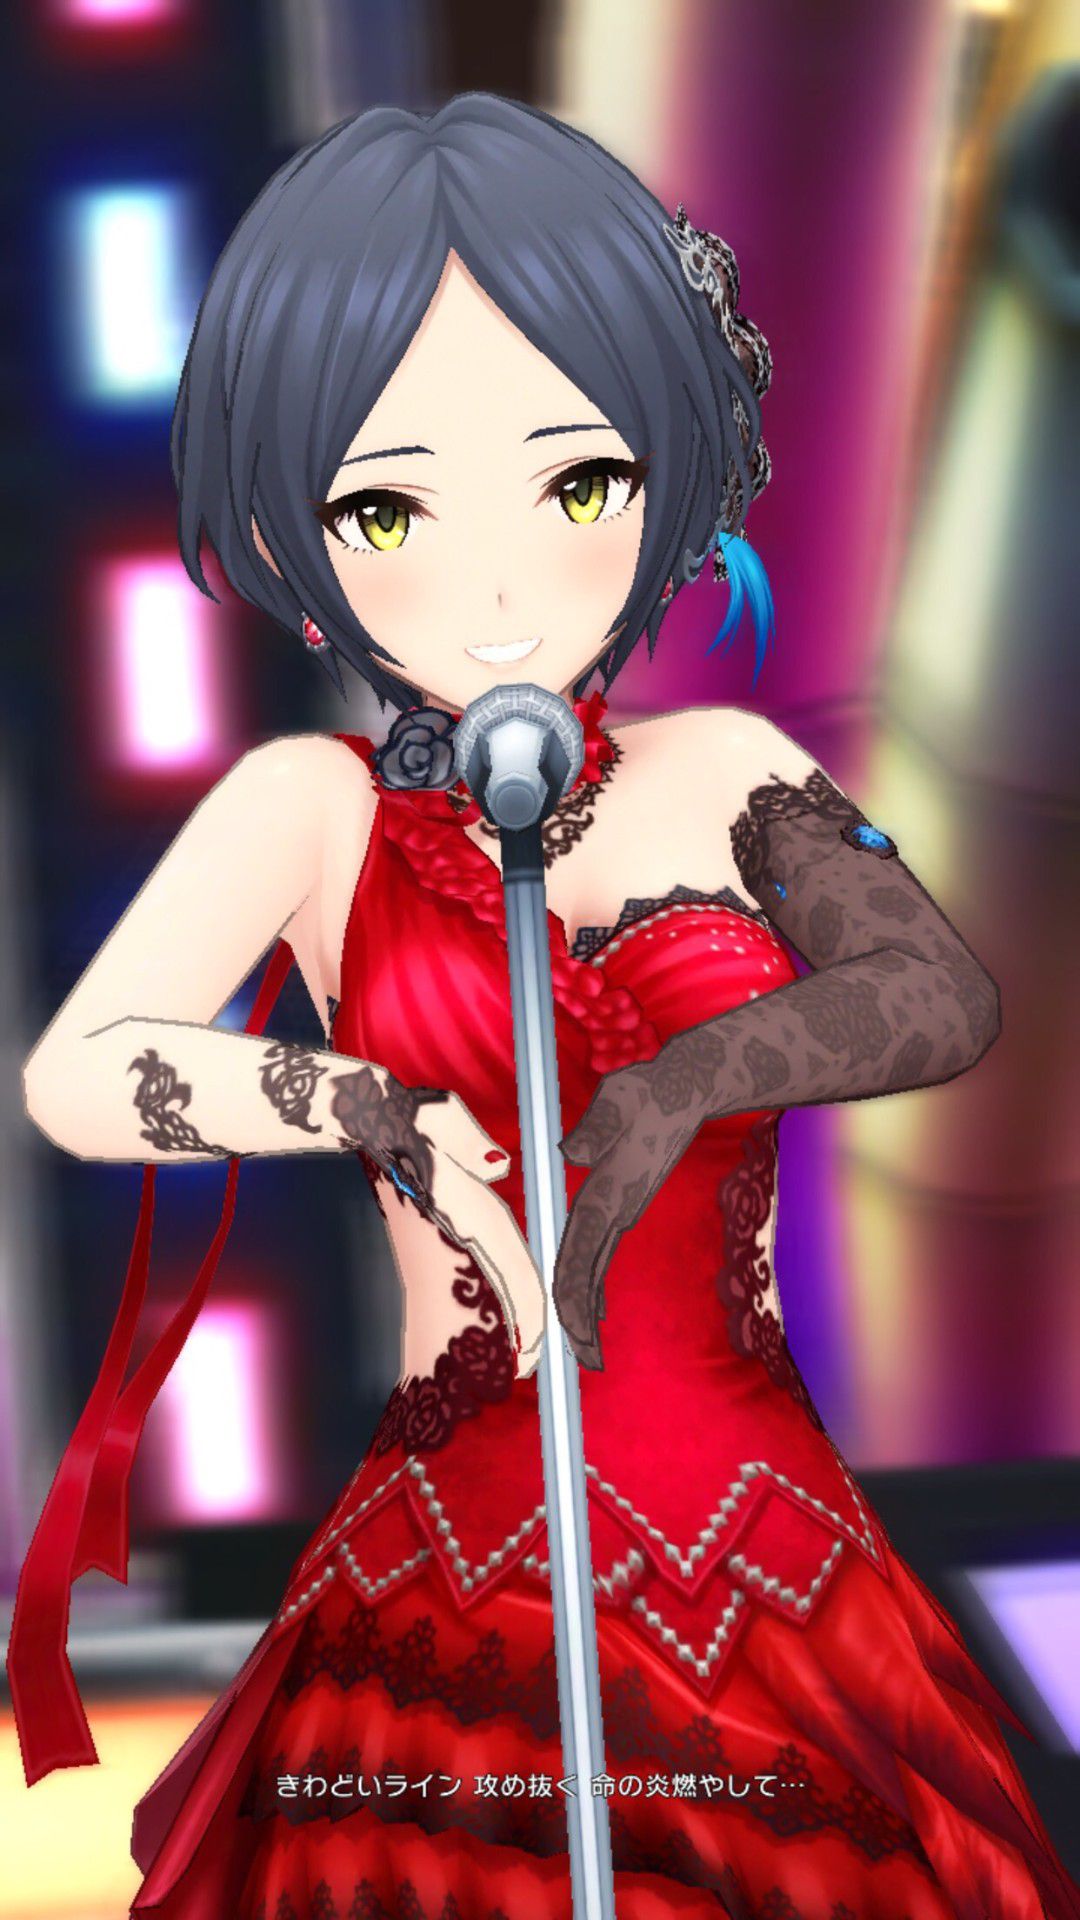 This child of デレステ is too pretty [there is an image]; ワロタ wwwwwwwwwwww 2